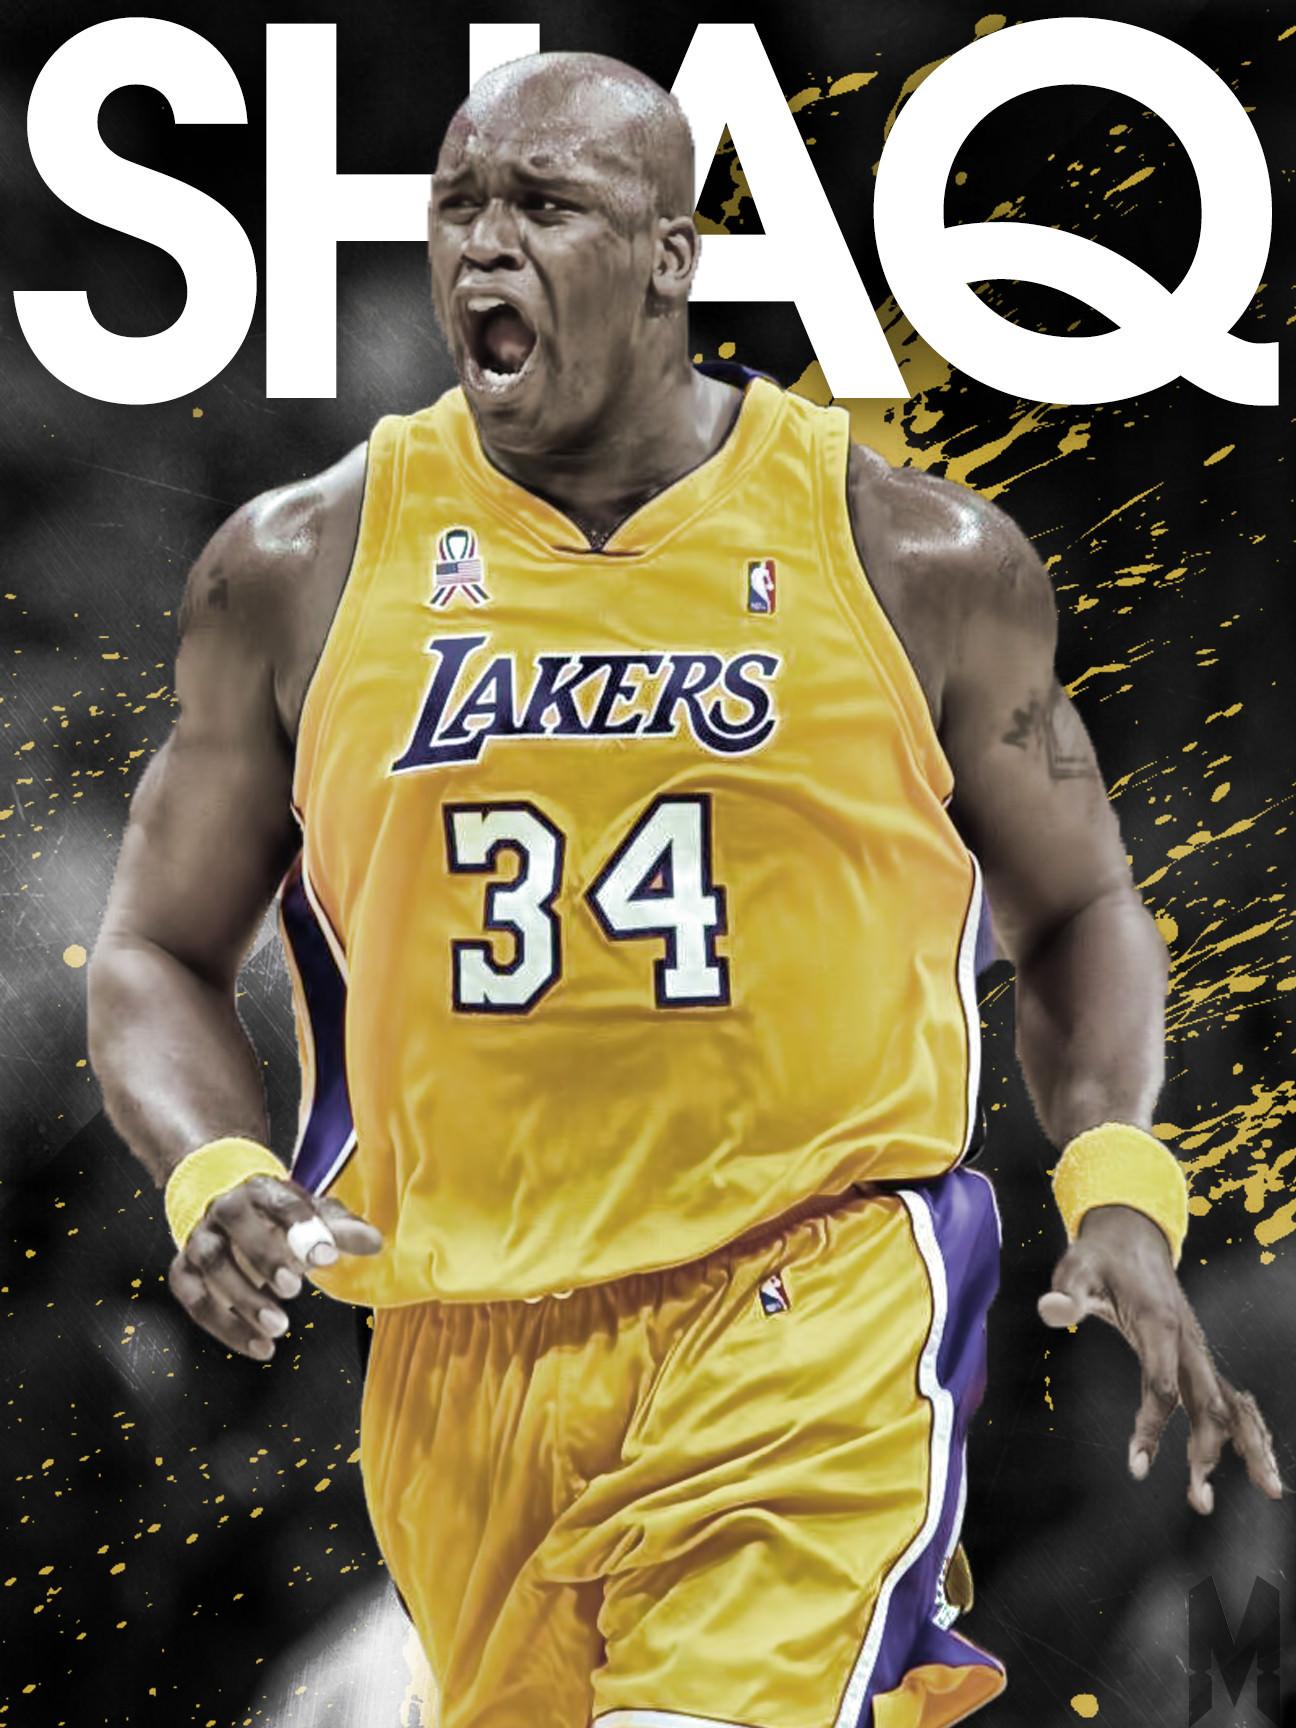 Shaquille O'neal HD Wallpaper For Desktop, iPhone & Mobile